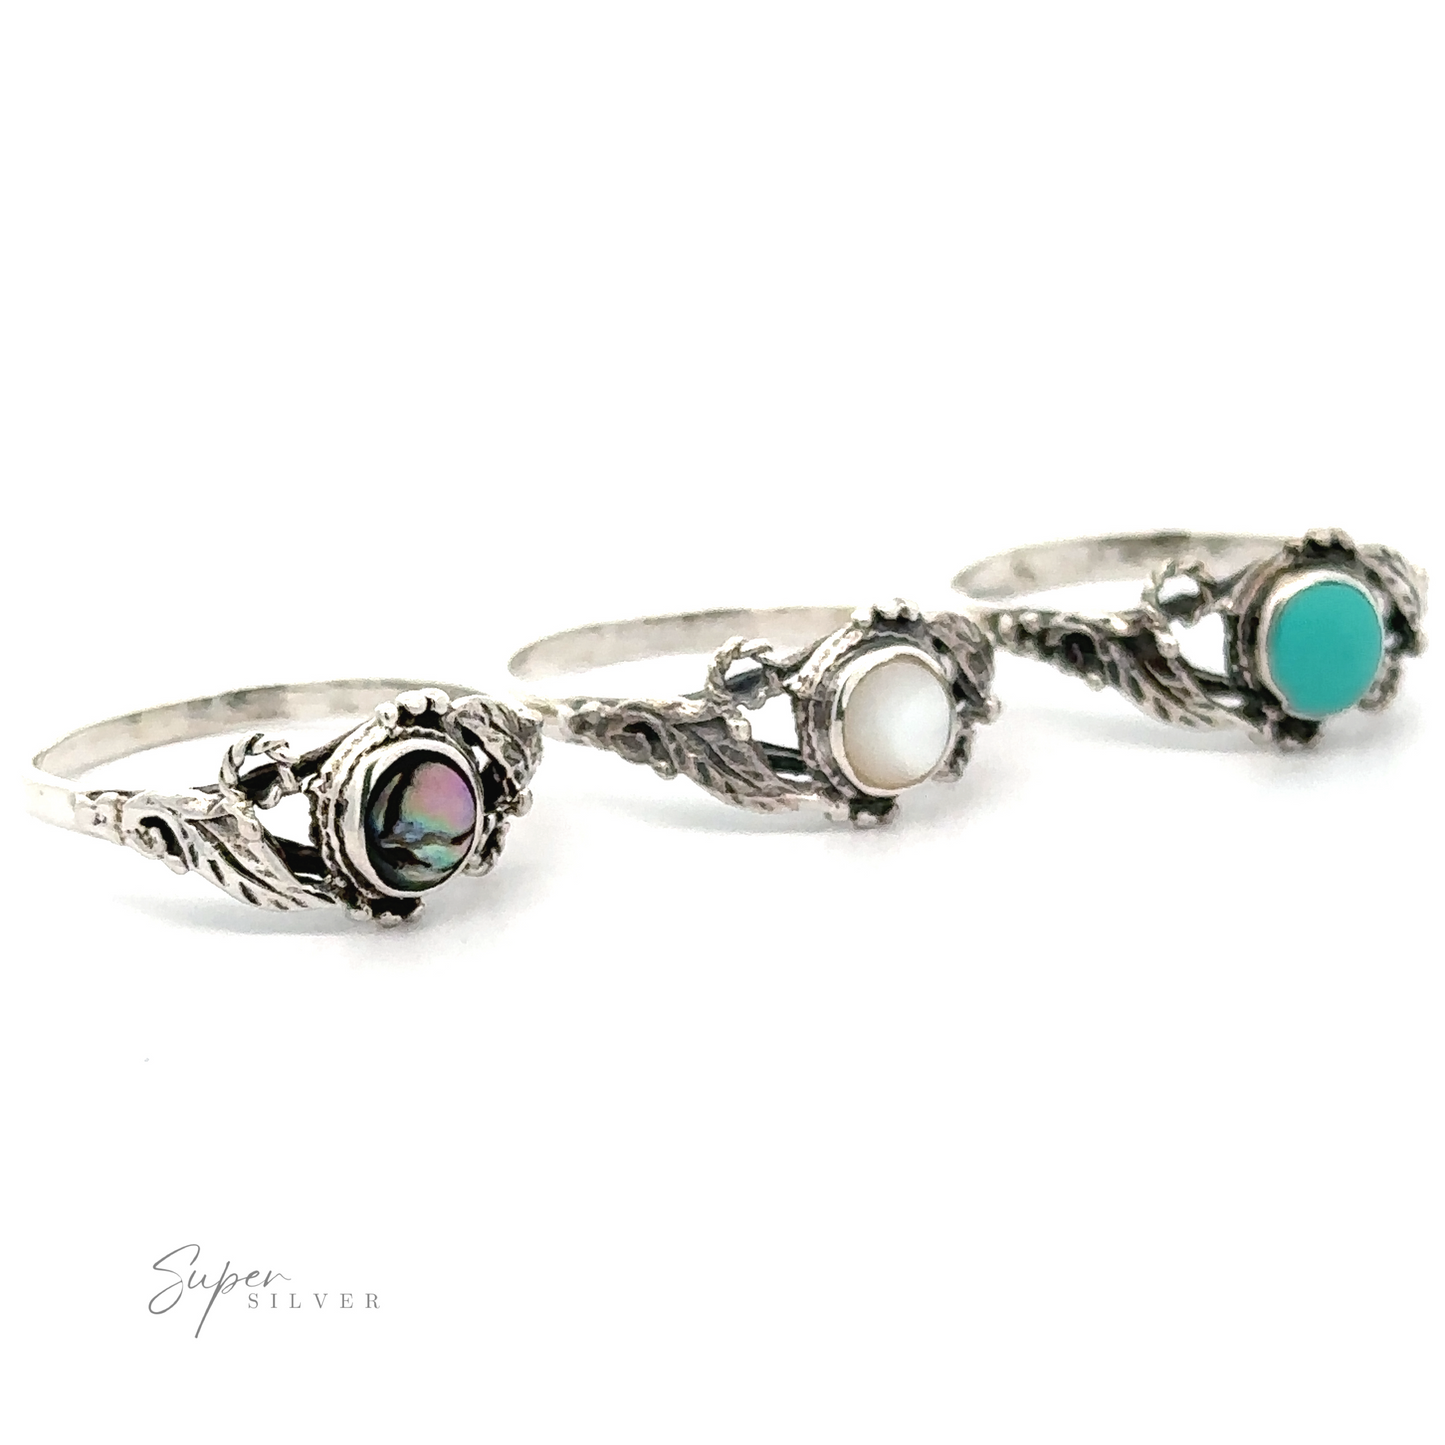 Three elegant Rope and Leaves Inlay Stone rings with various colored gemstones on a white background.